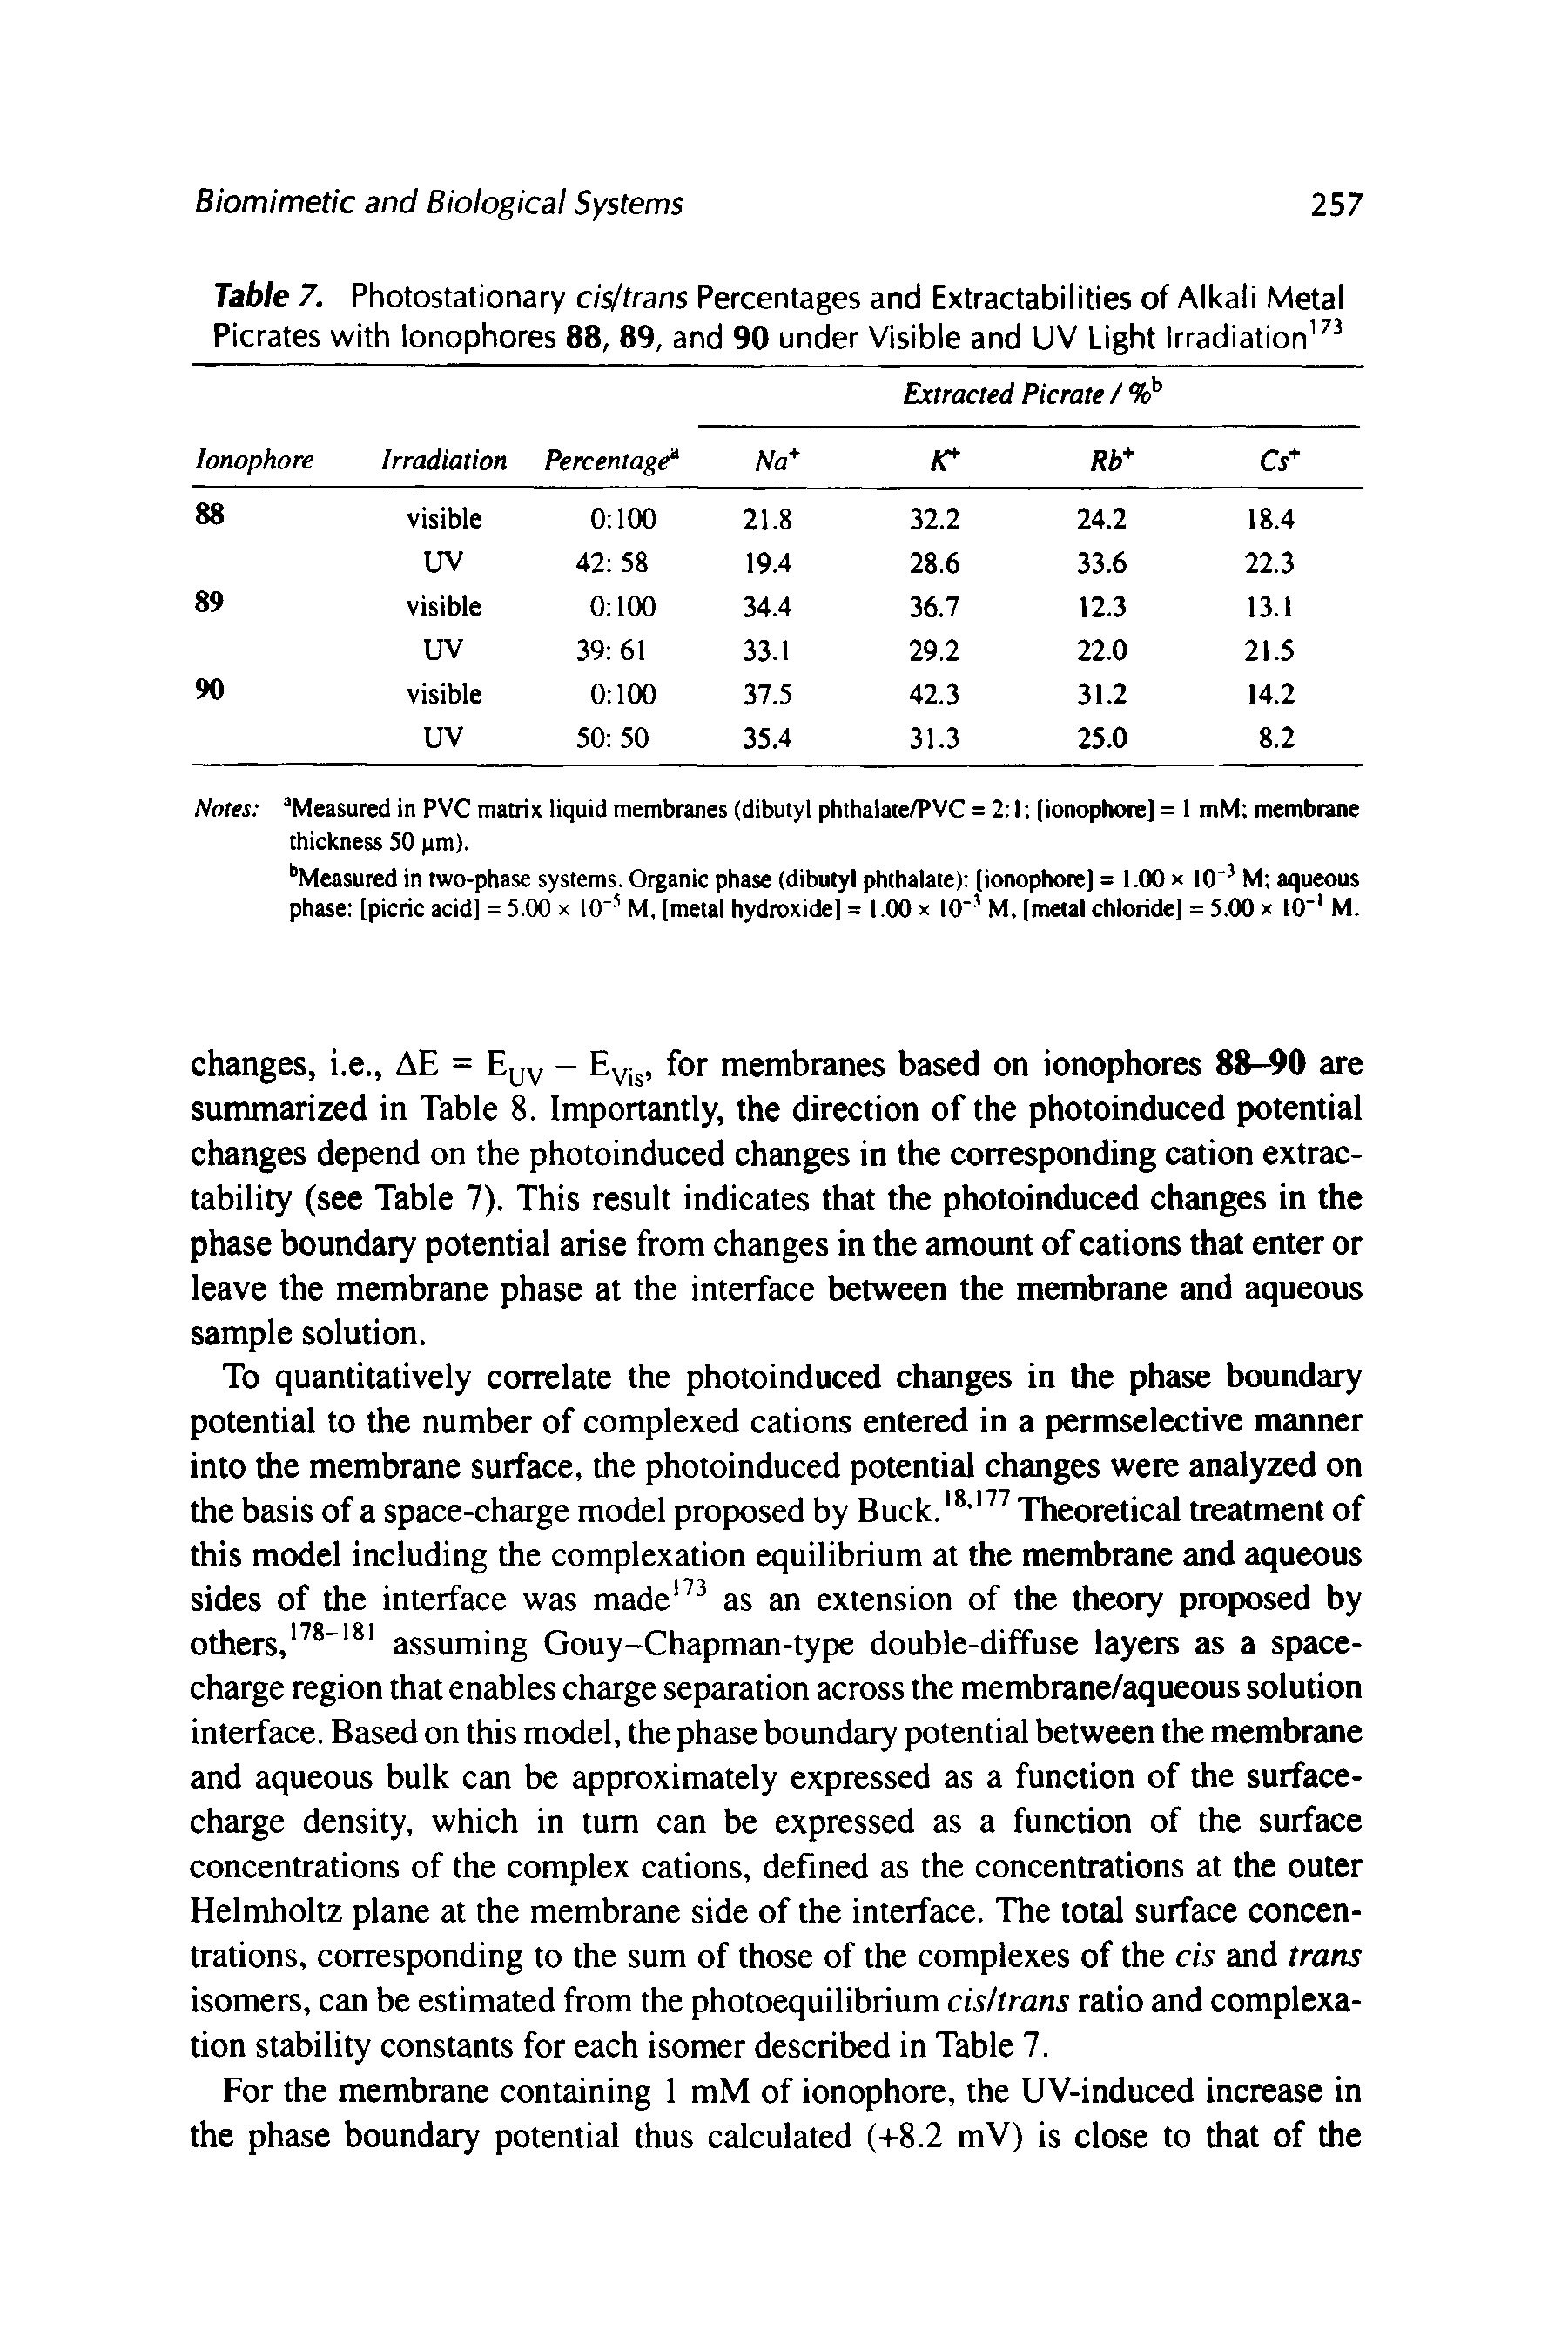 Table 7. Photostationary cis/trans Percentages and Extractabilities of Alkali Metal Picrates with lonophores 88, 89, and 90 under Visible and UV Light Irradiation ...